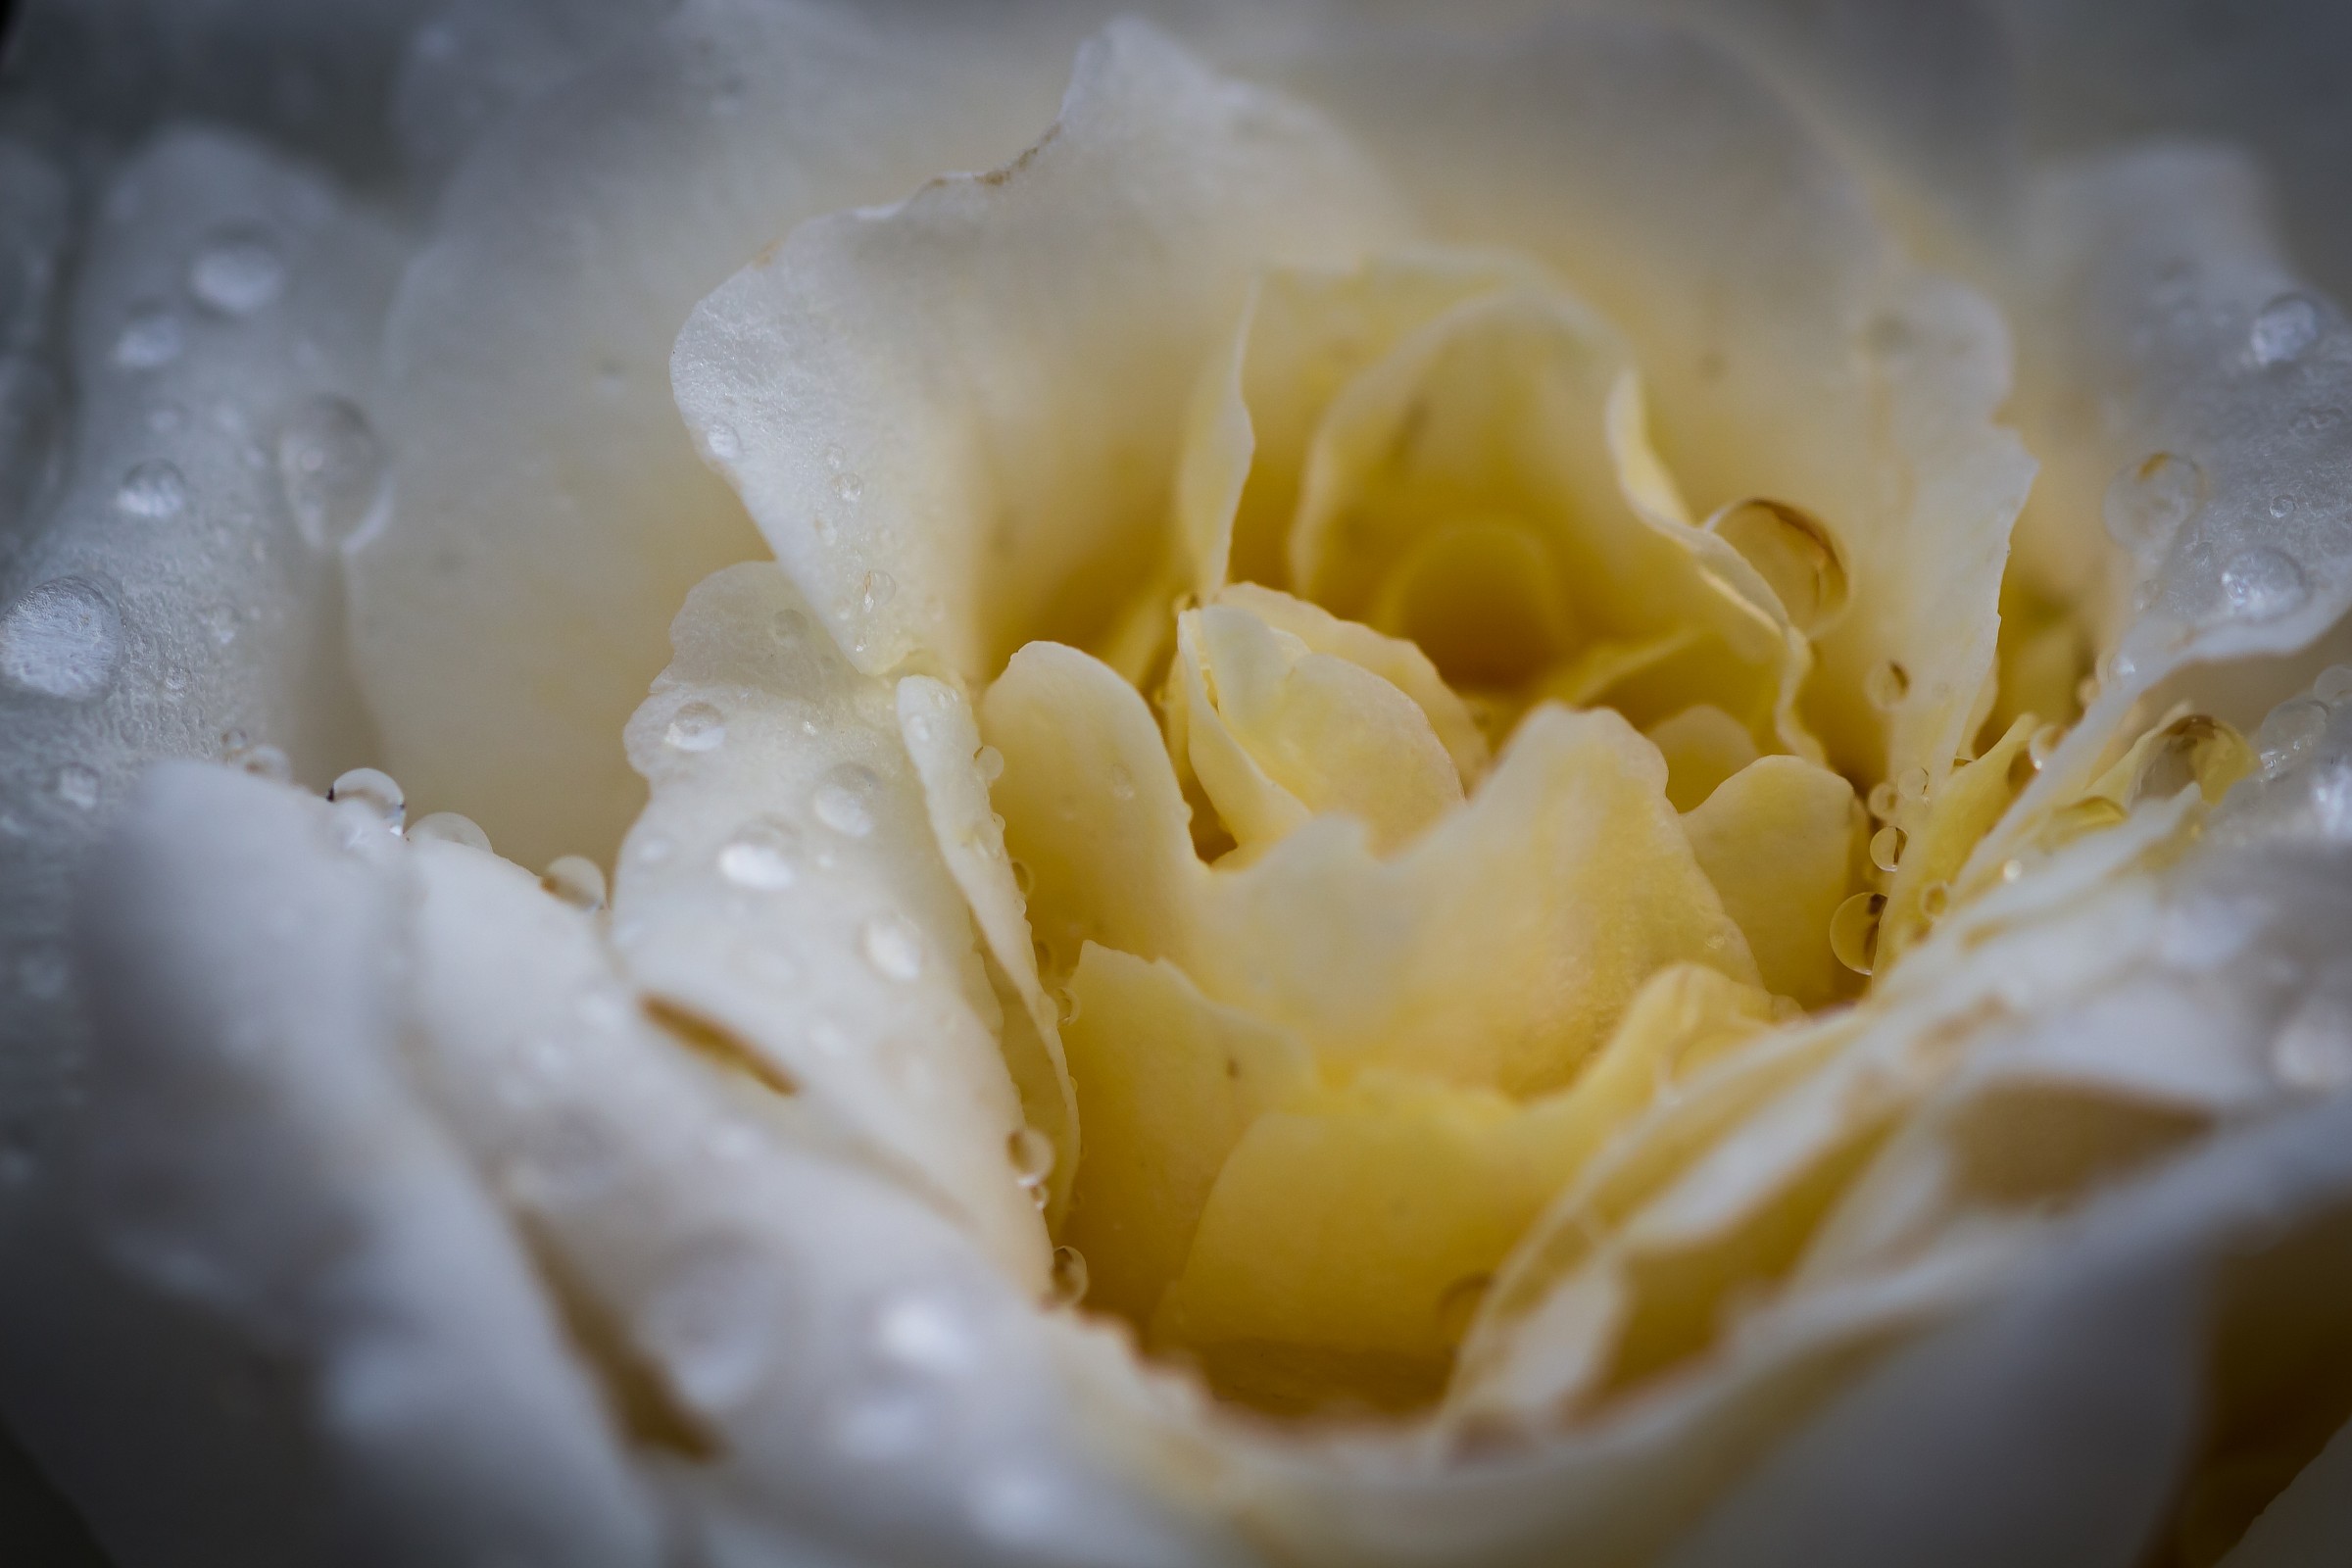 The Heart of a Rose...